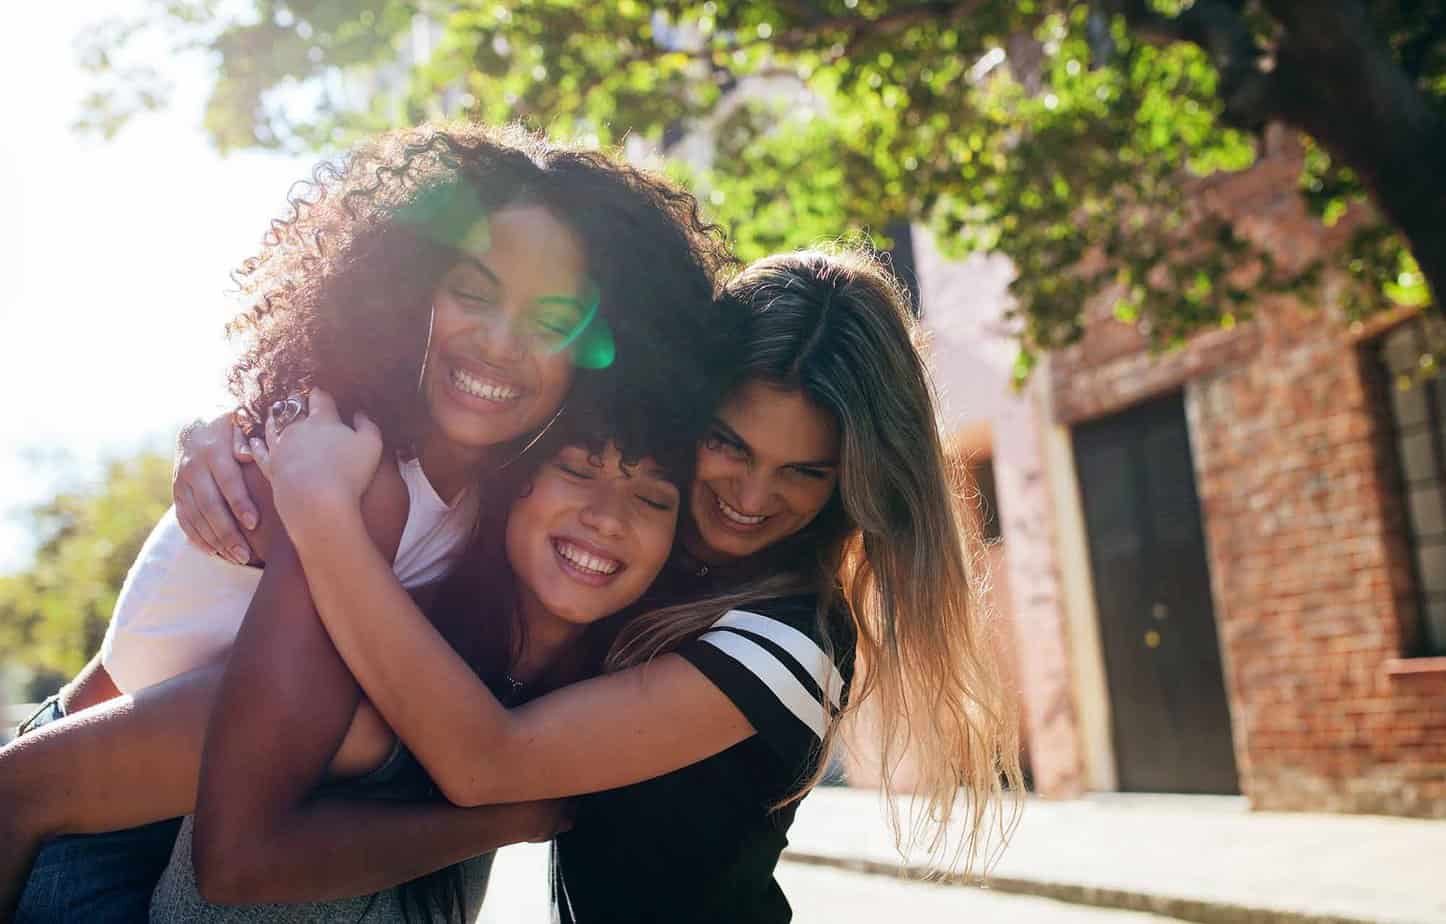 group of females support their friend in addiction recovery by hugging each other outside